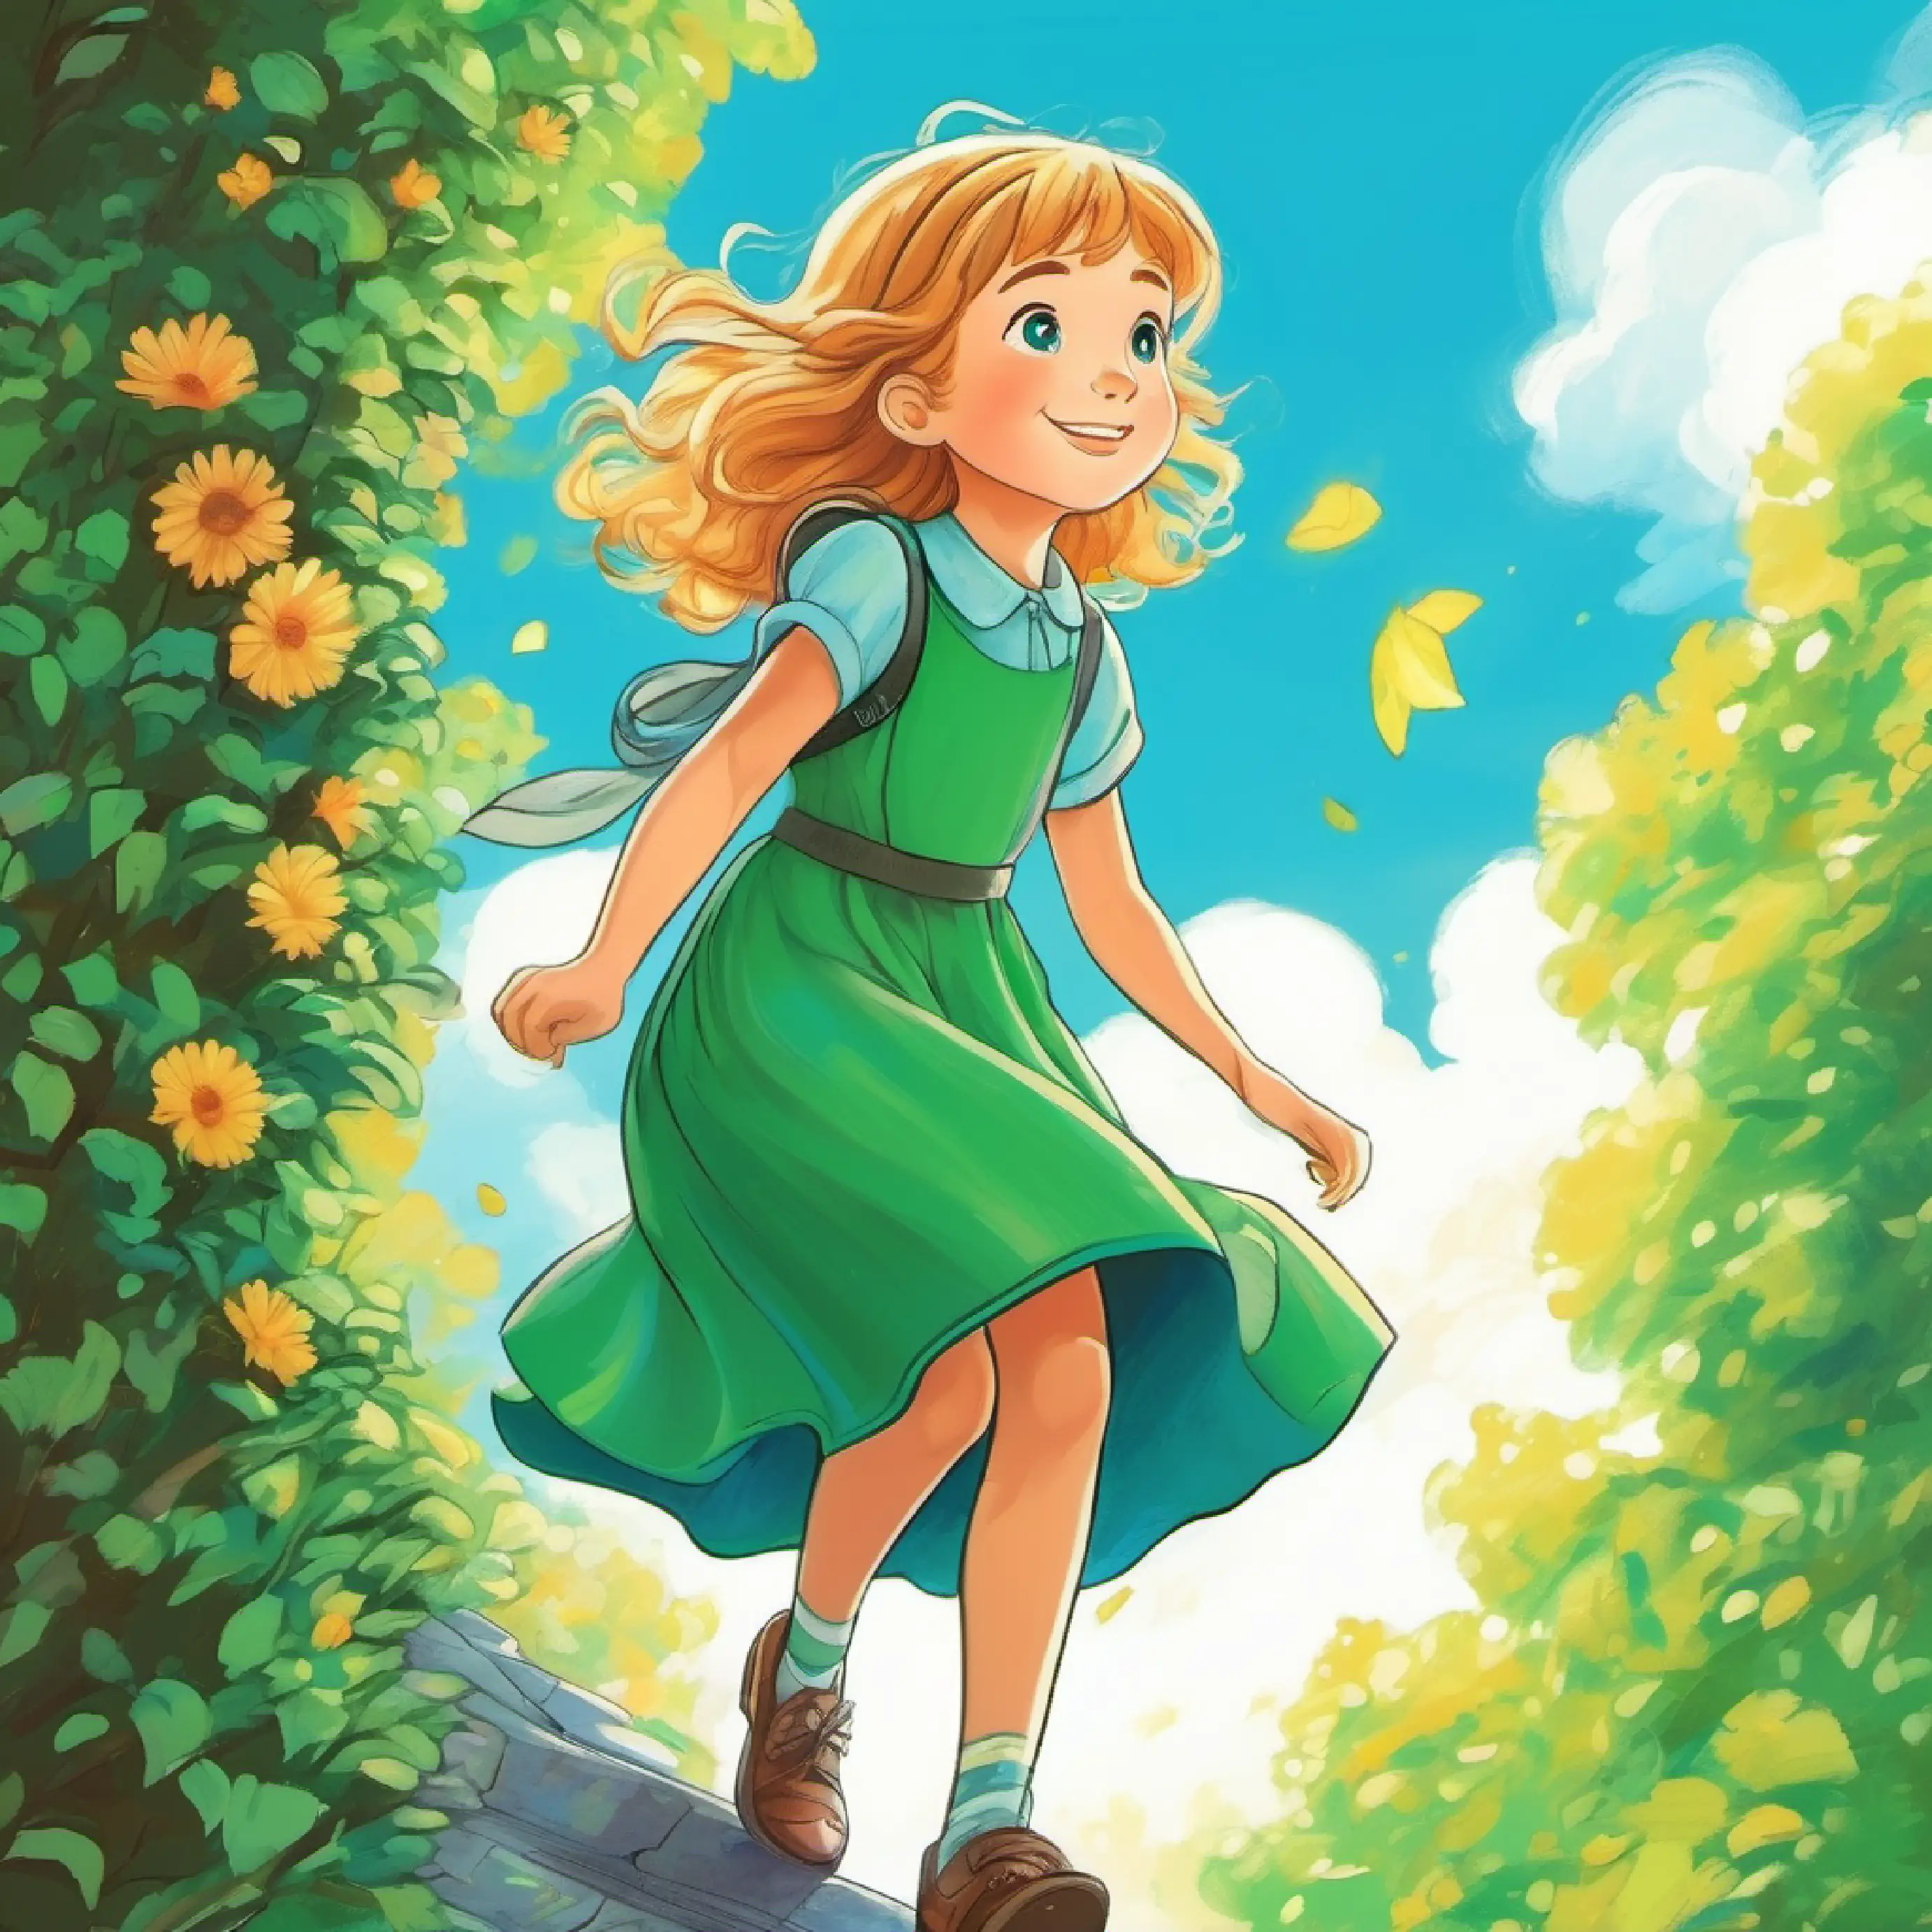 Girl with sunny hair, full of hope, bright blue eyes, wears a green dress climbing down, feeling fulfilled and thankful.